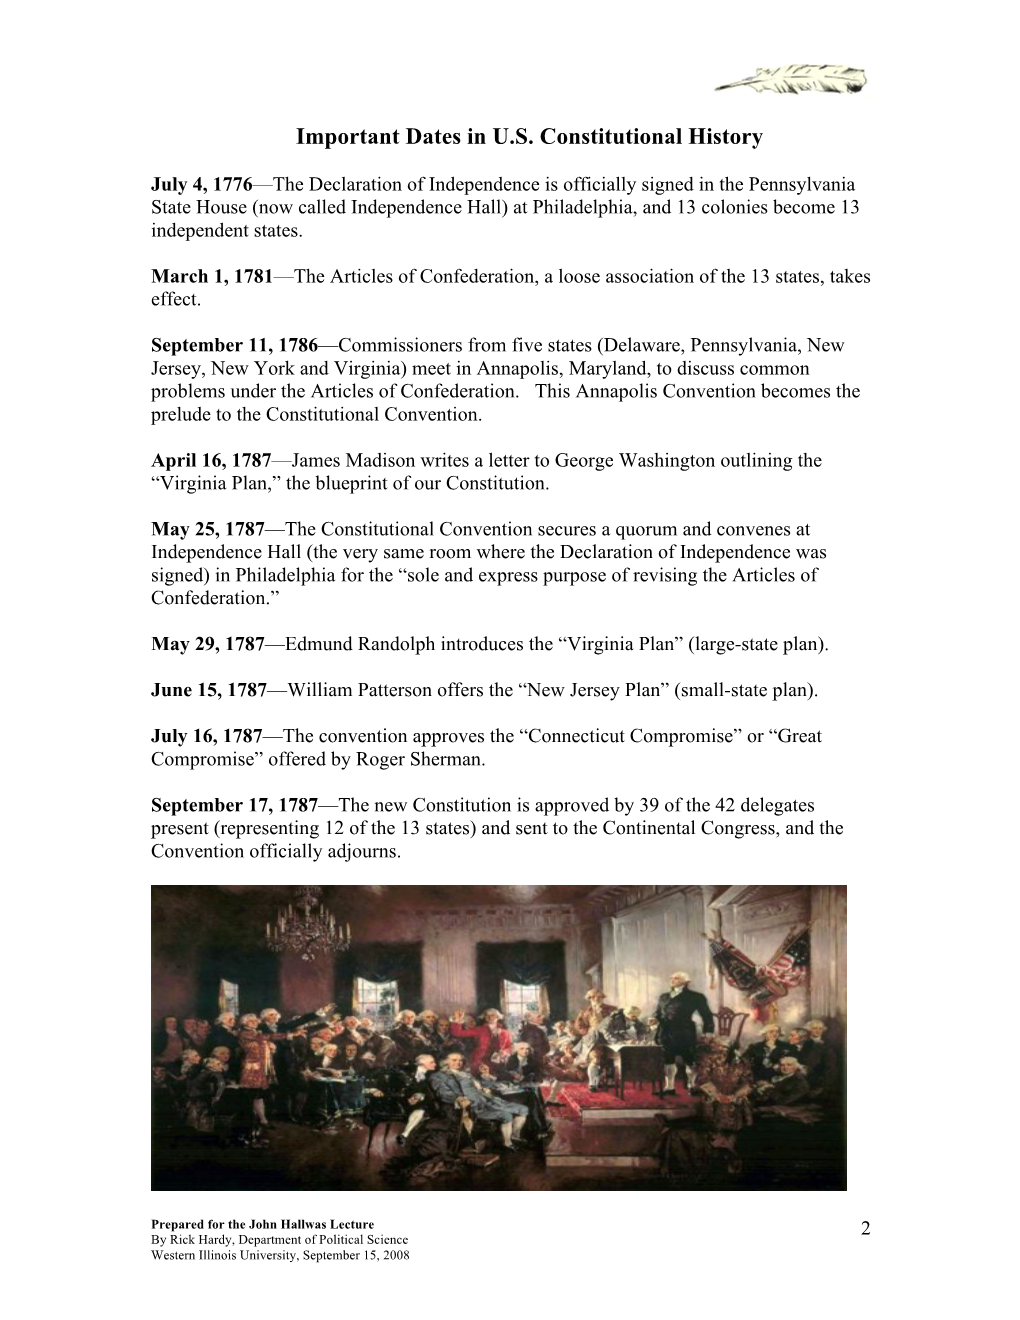 Important Dates in US Constitutional History